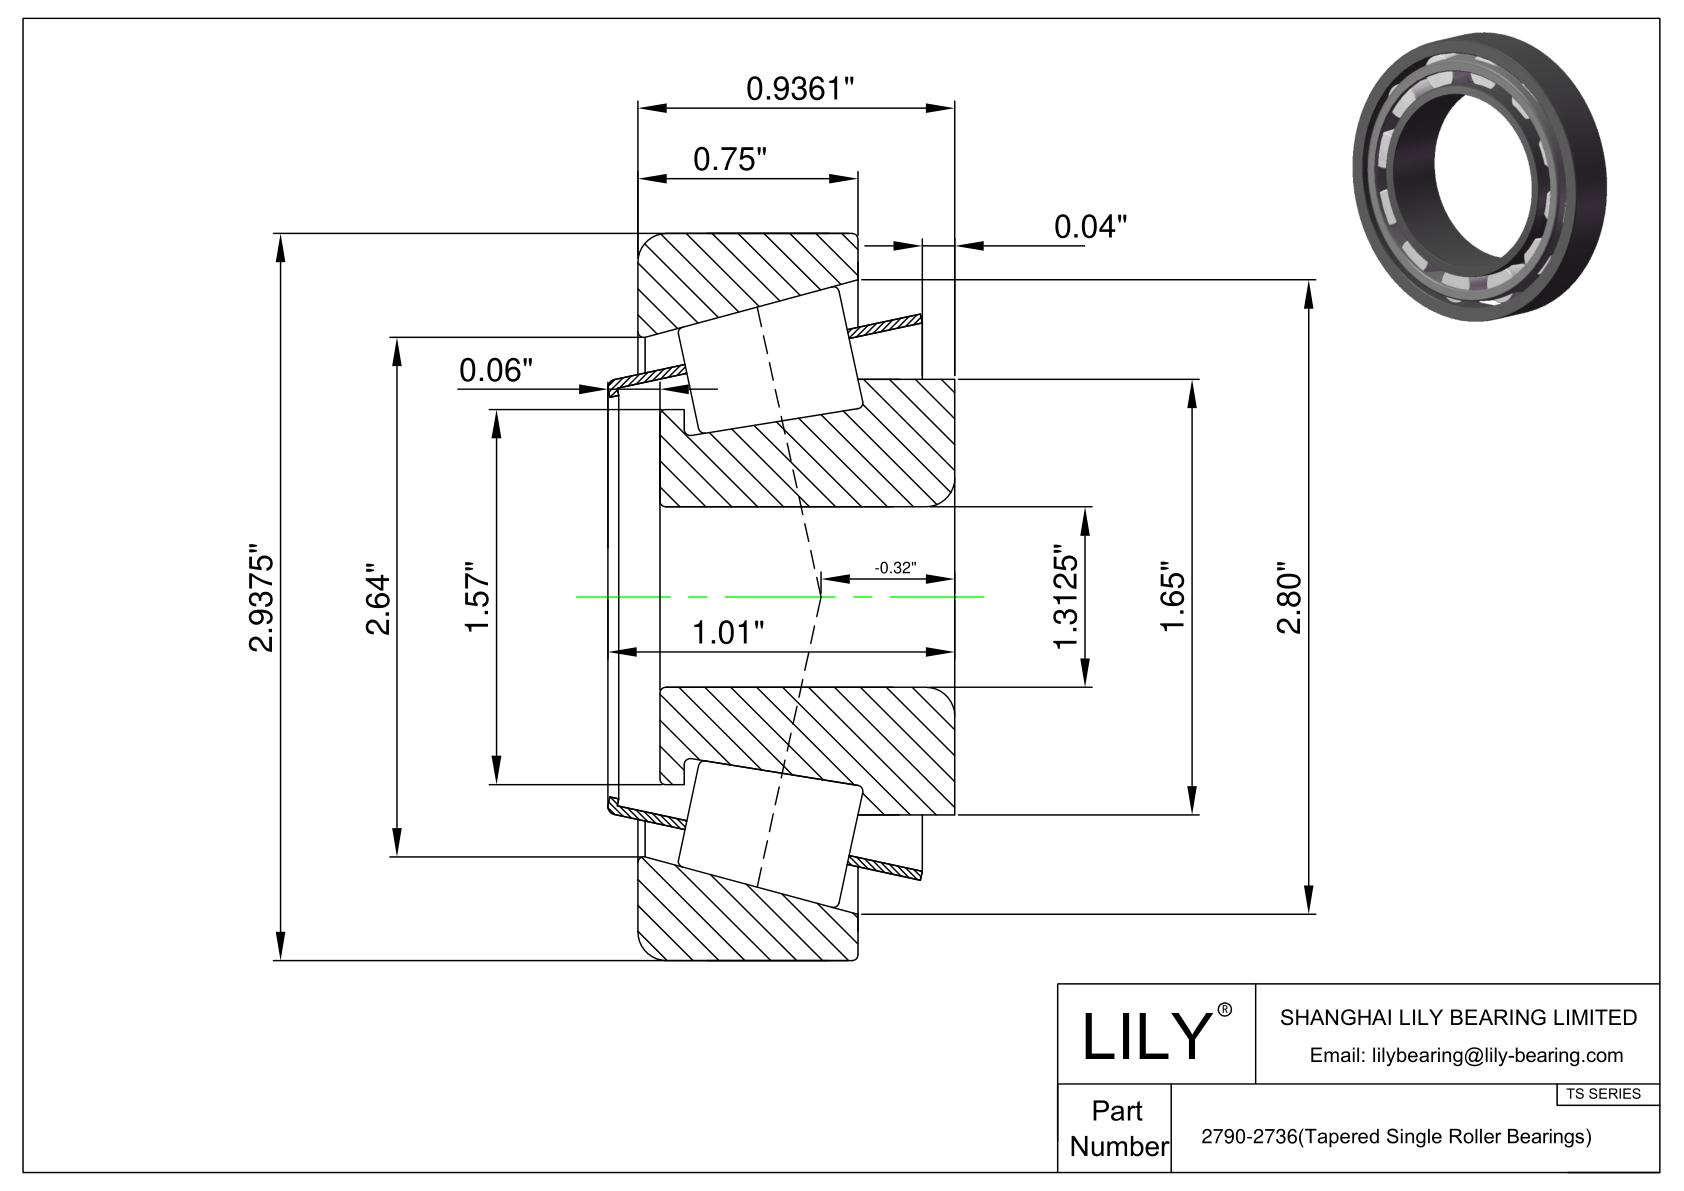 2790-2736 TS (Tapered Single Roller Bearings) (Imperial) cad drawing